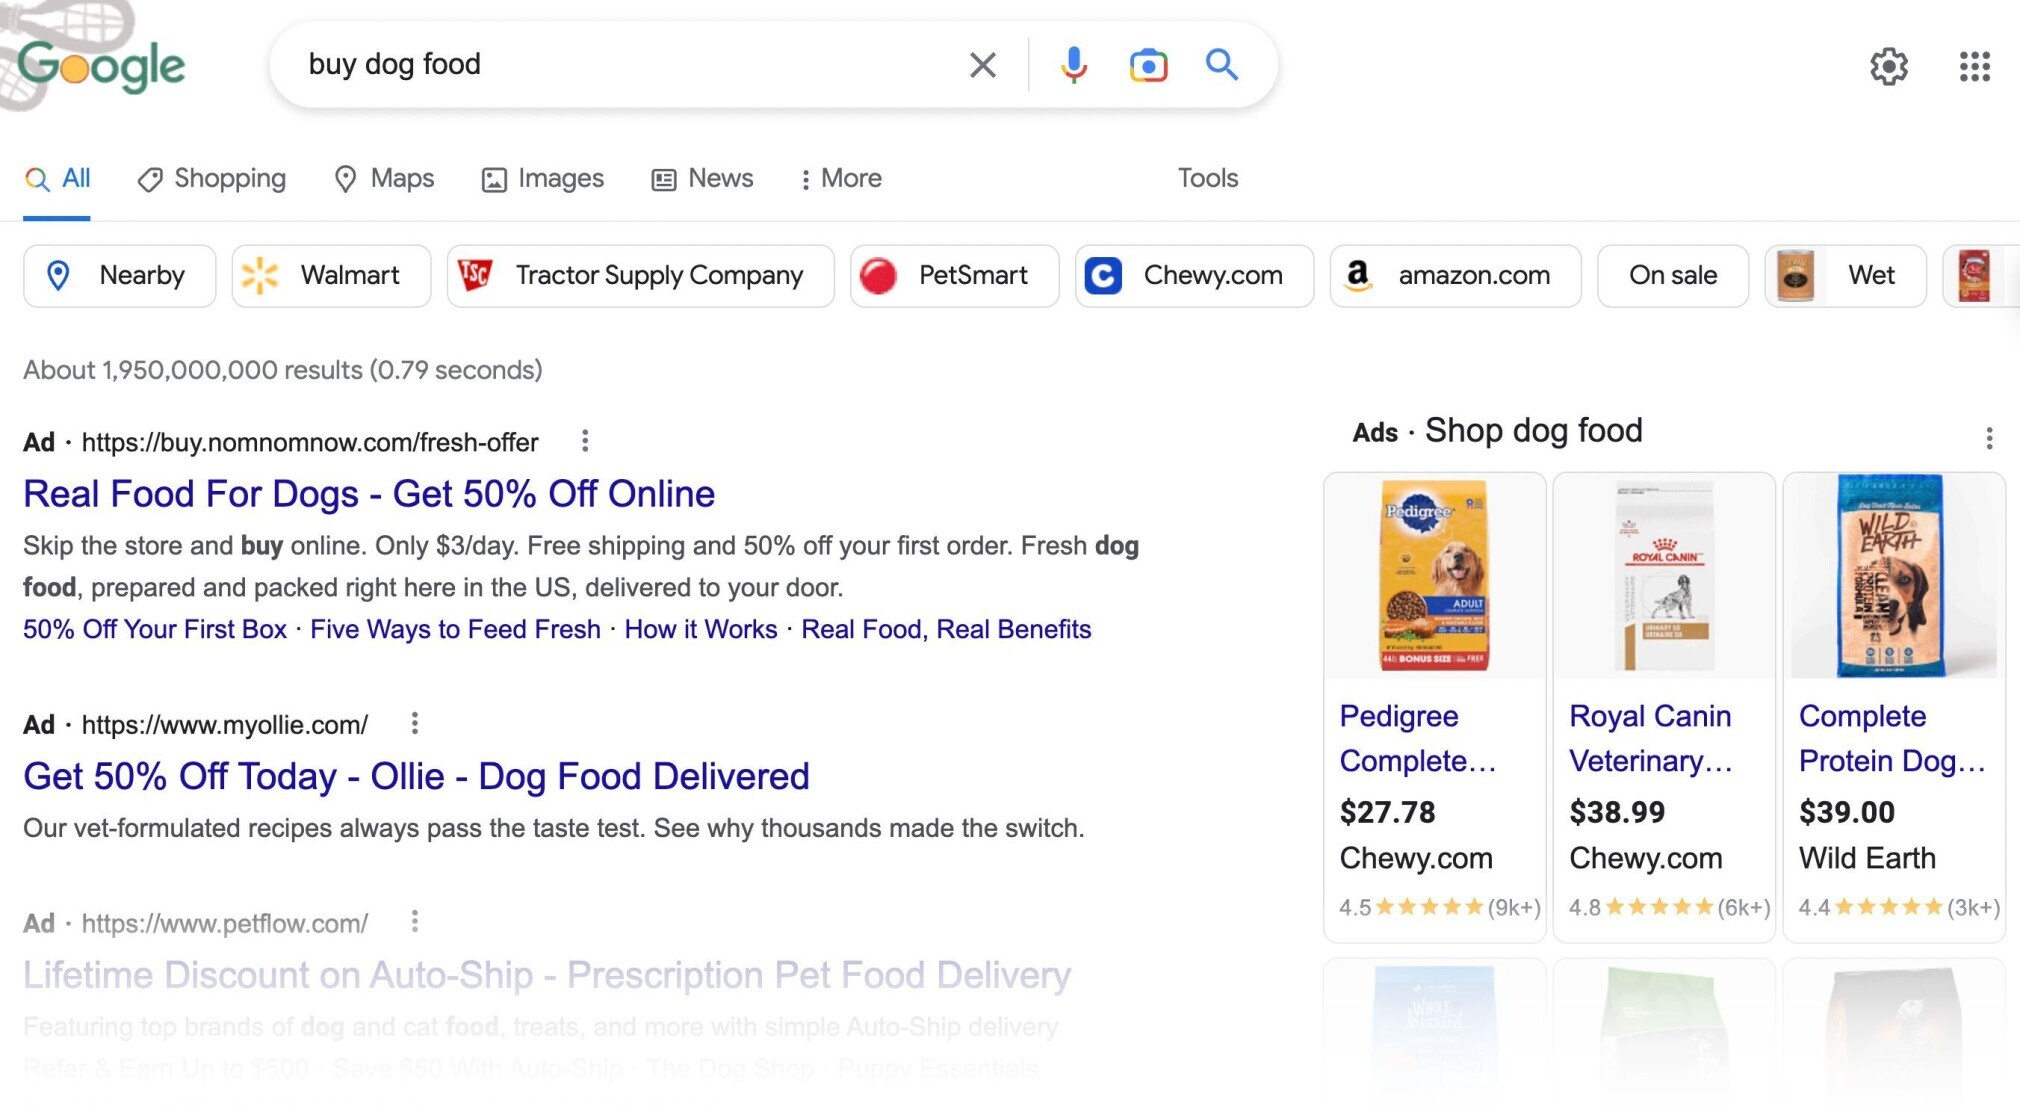 The SERP for "buy dog food" with lots of ads